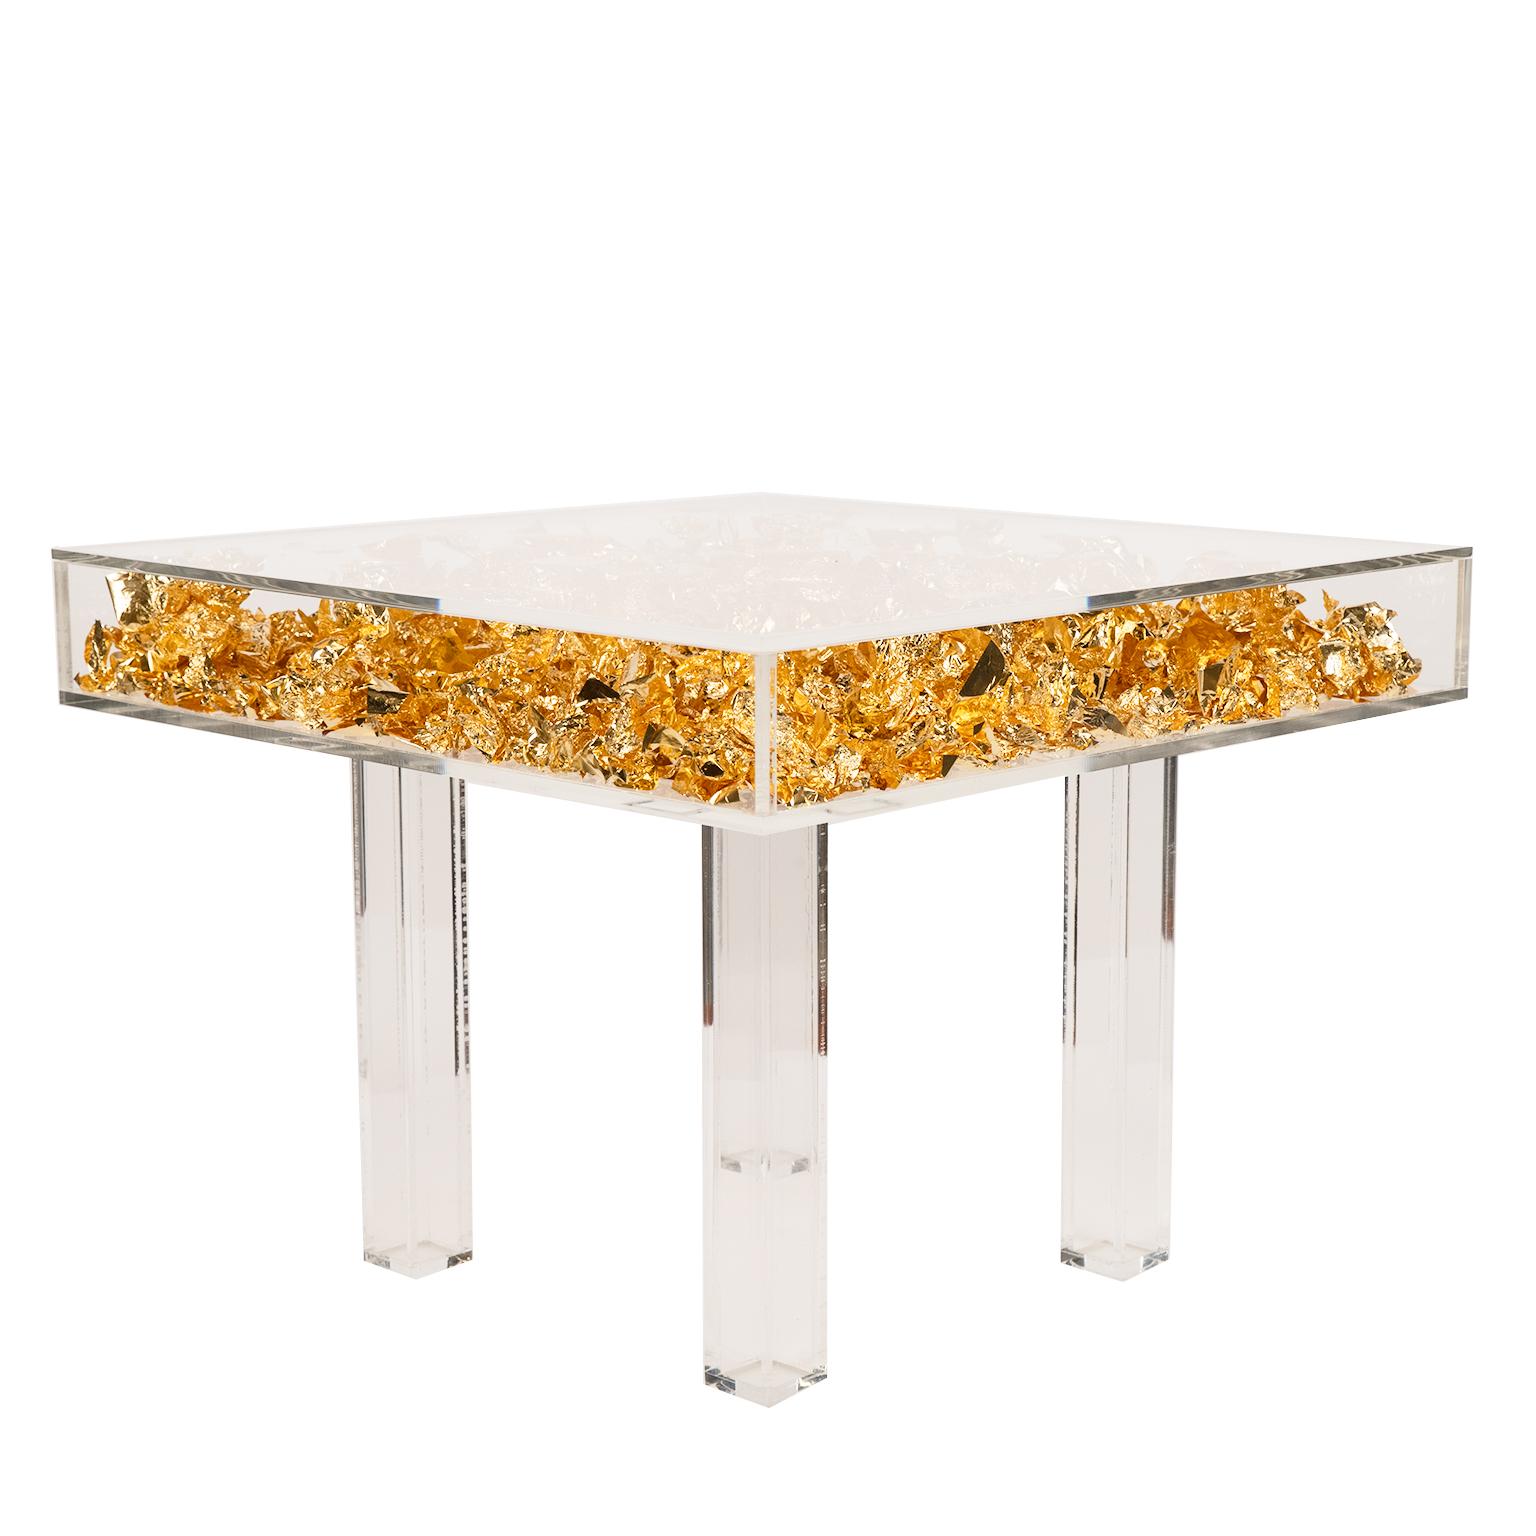 Hollywood Regency Custom Made Acrylic And Gold Leaf Coffee or Side Table For Sale